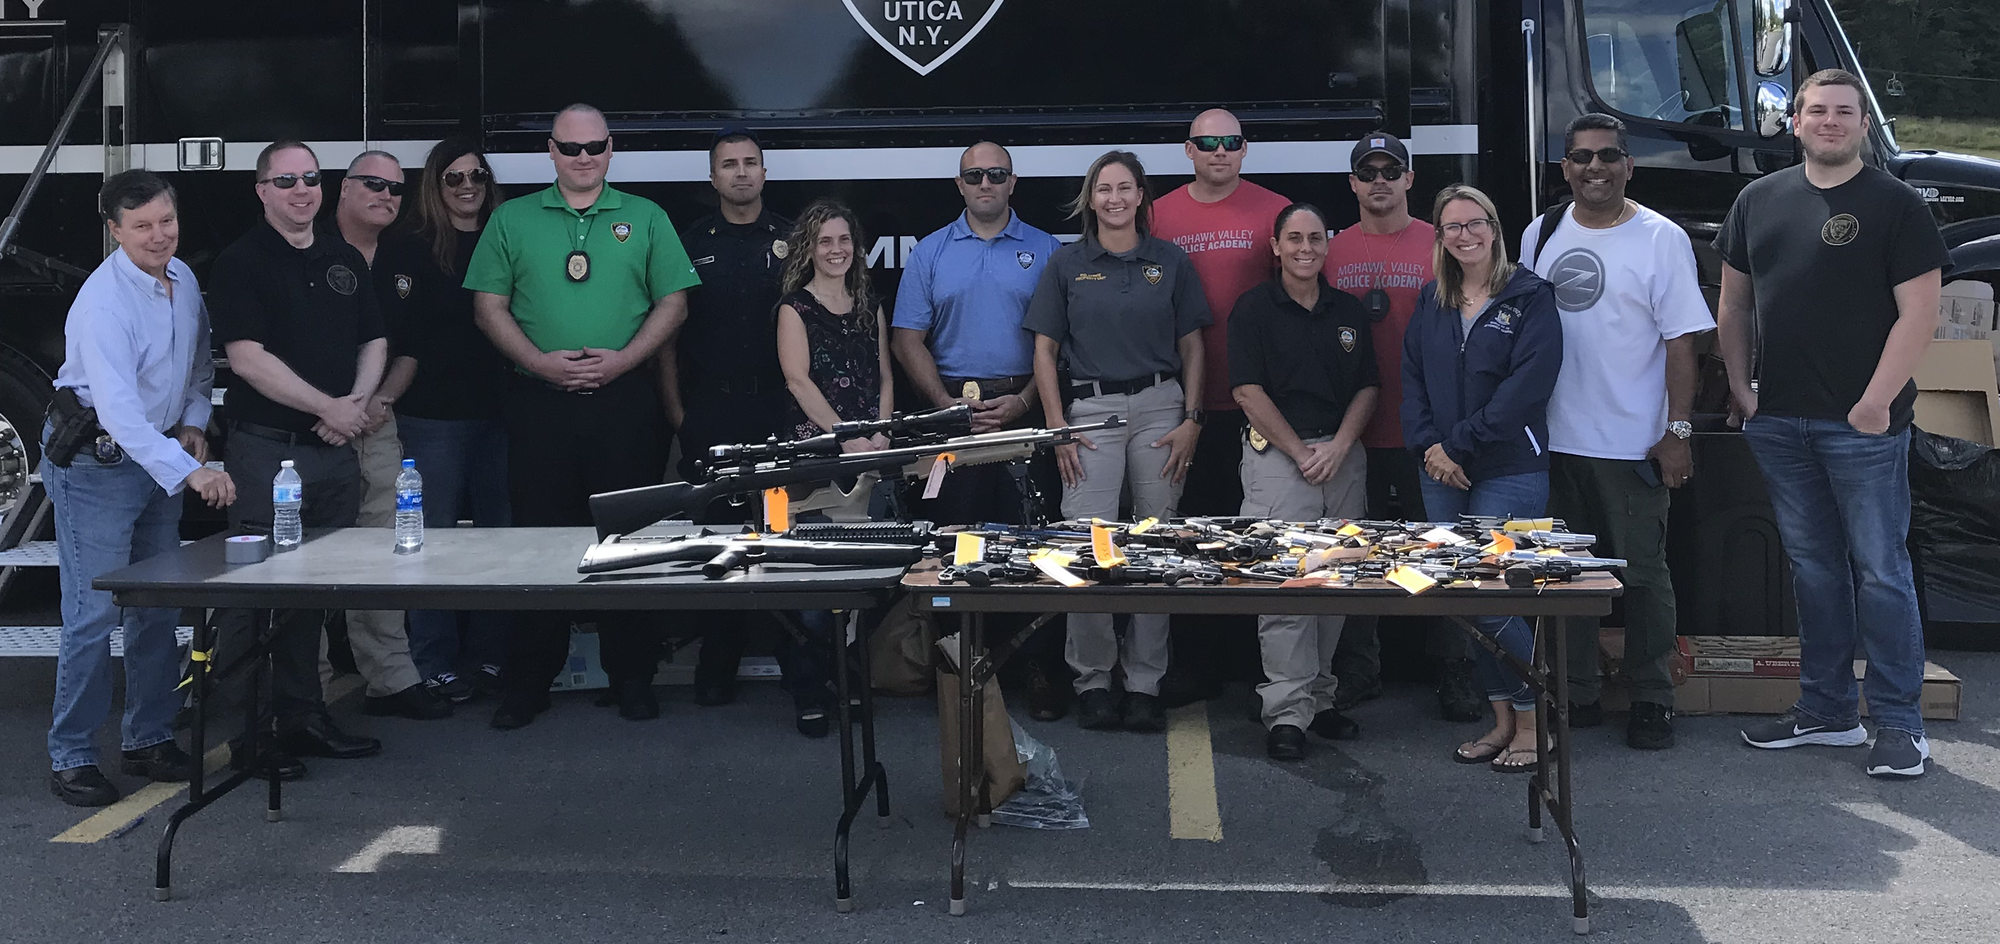 More than 280 guns recovered at a gun buyback event in Utica 